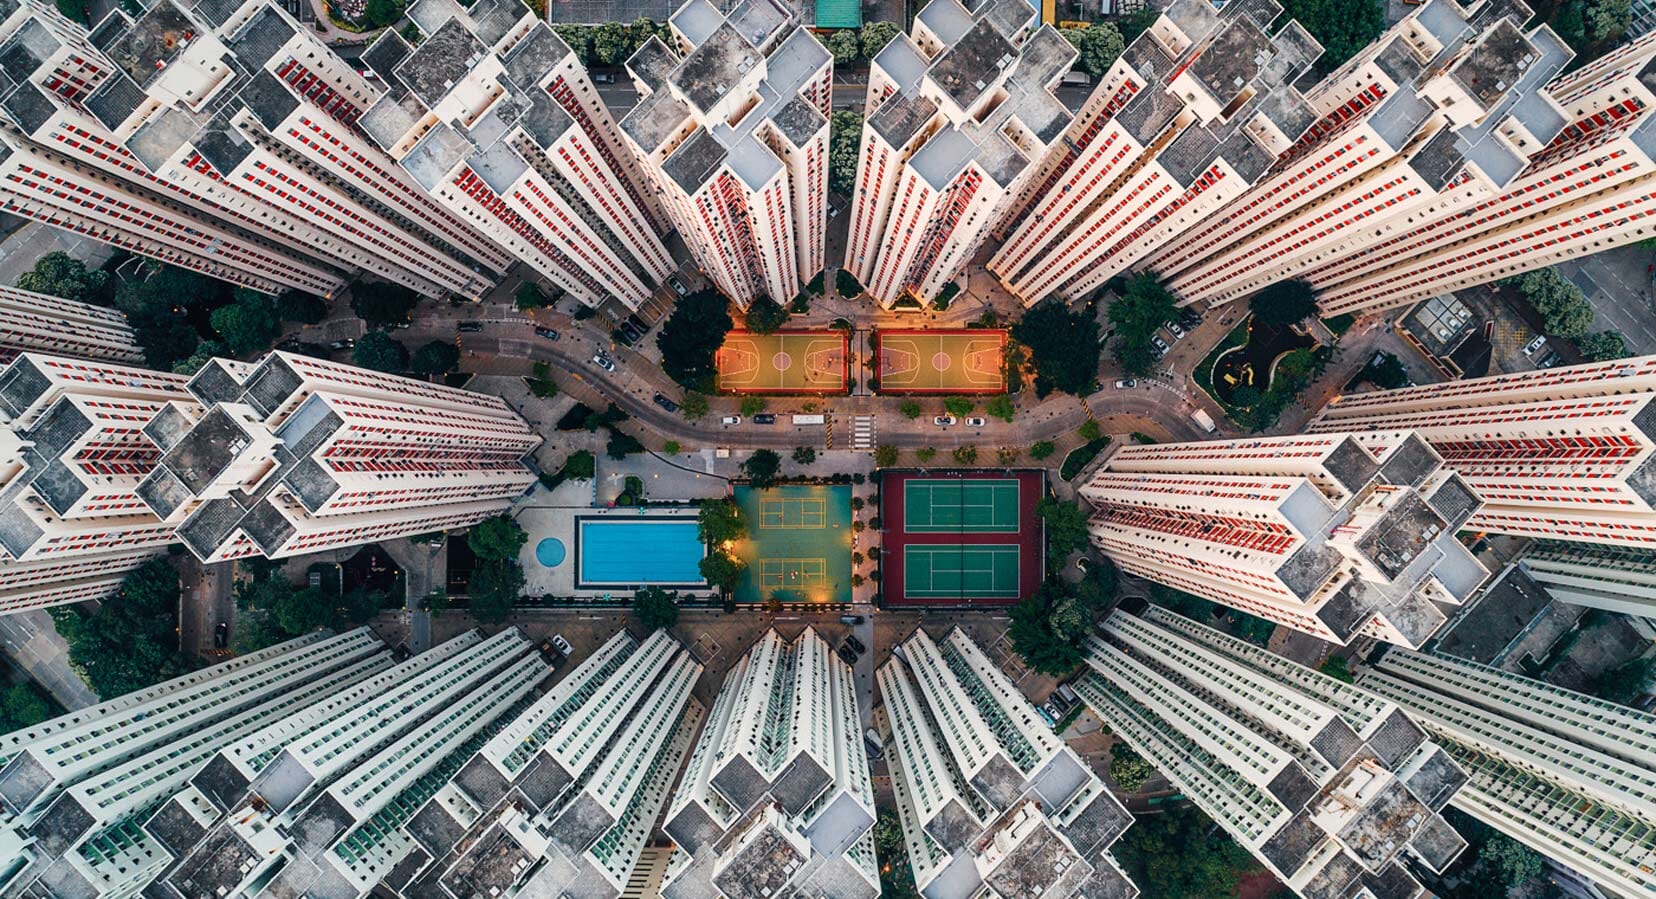 Vantage Point: Take A Look The ‘Walled City’ Series by Andy Yeung